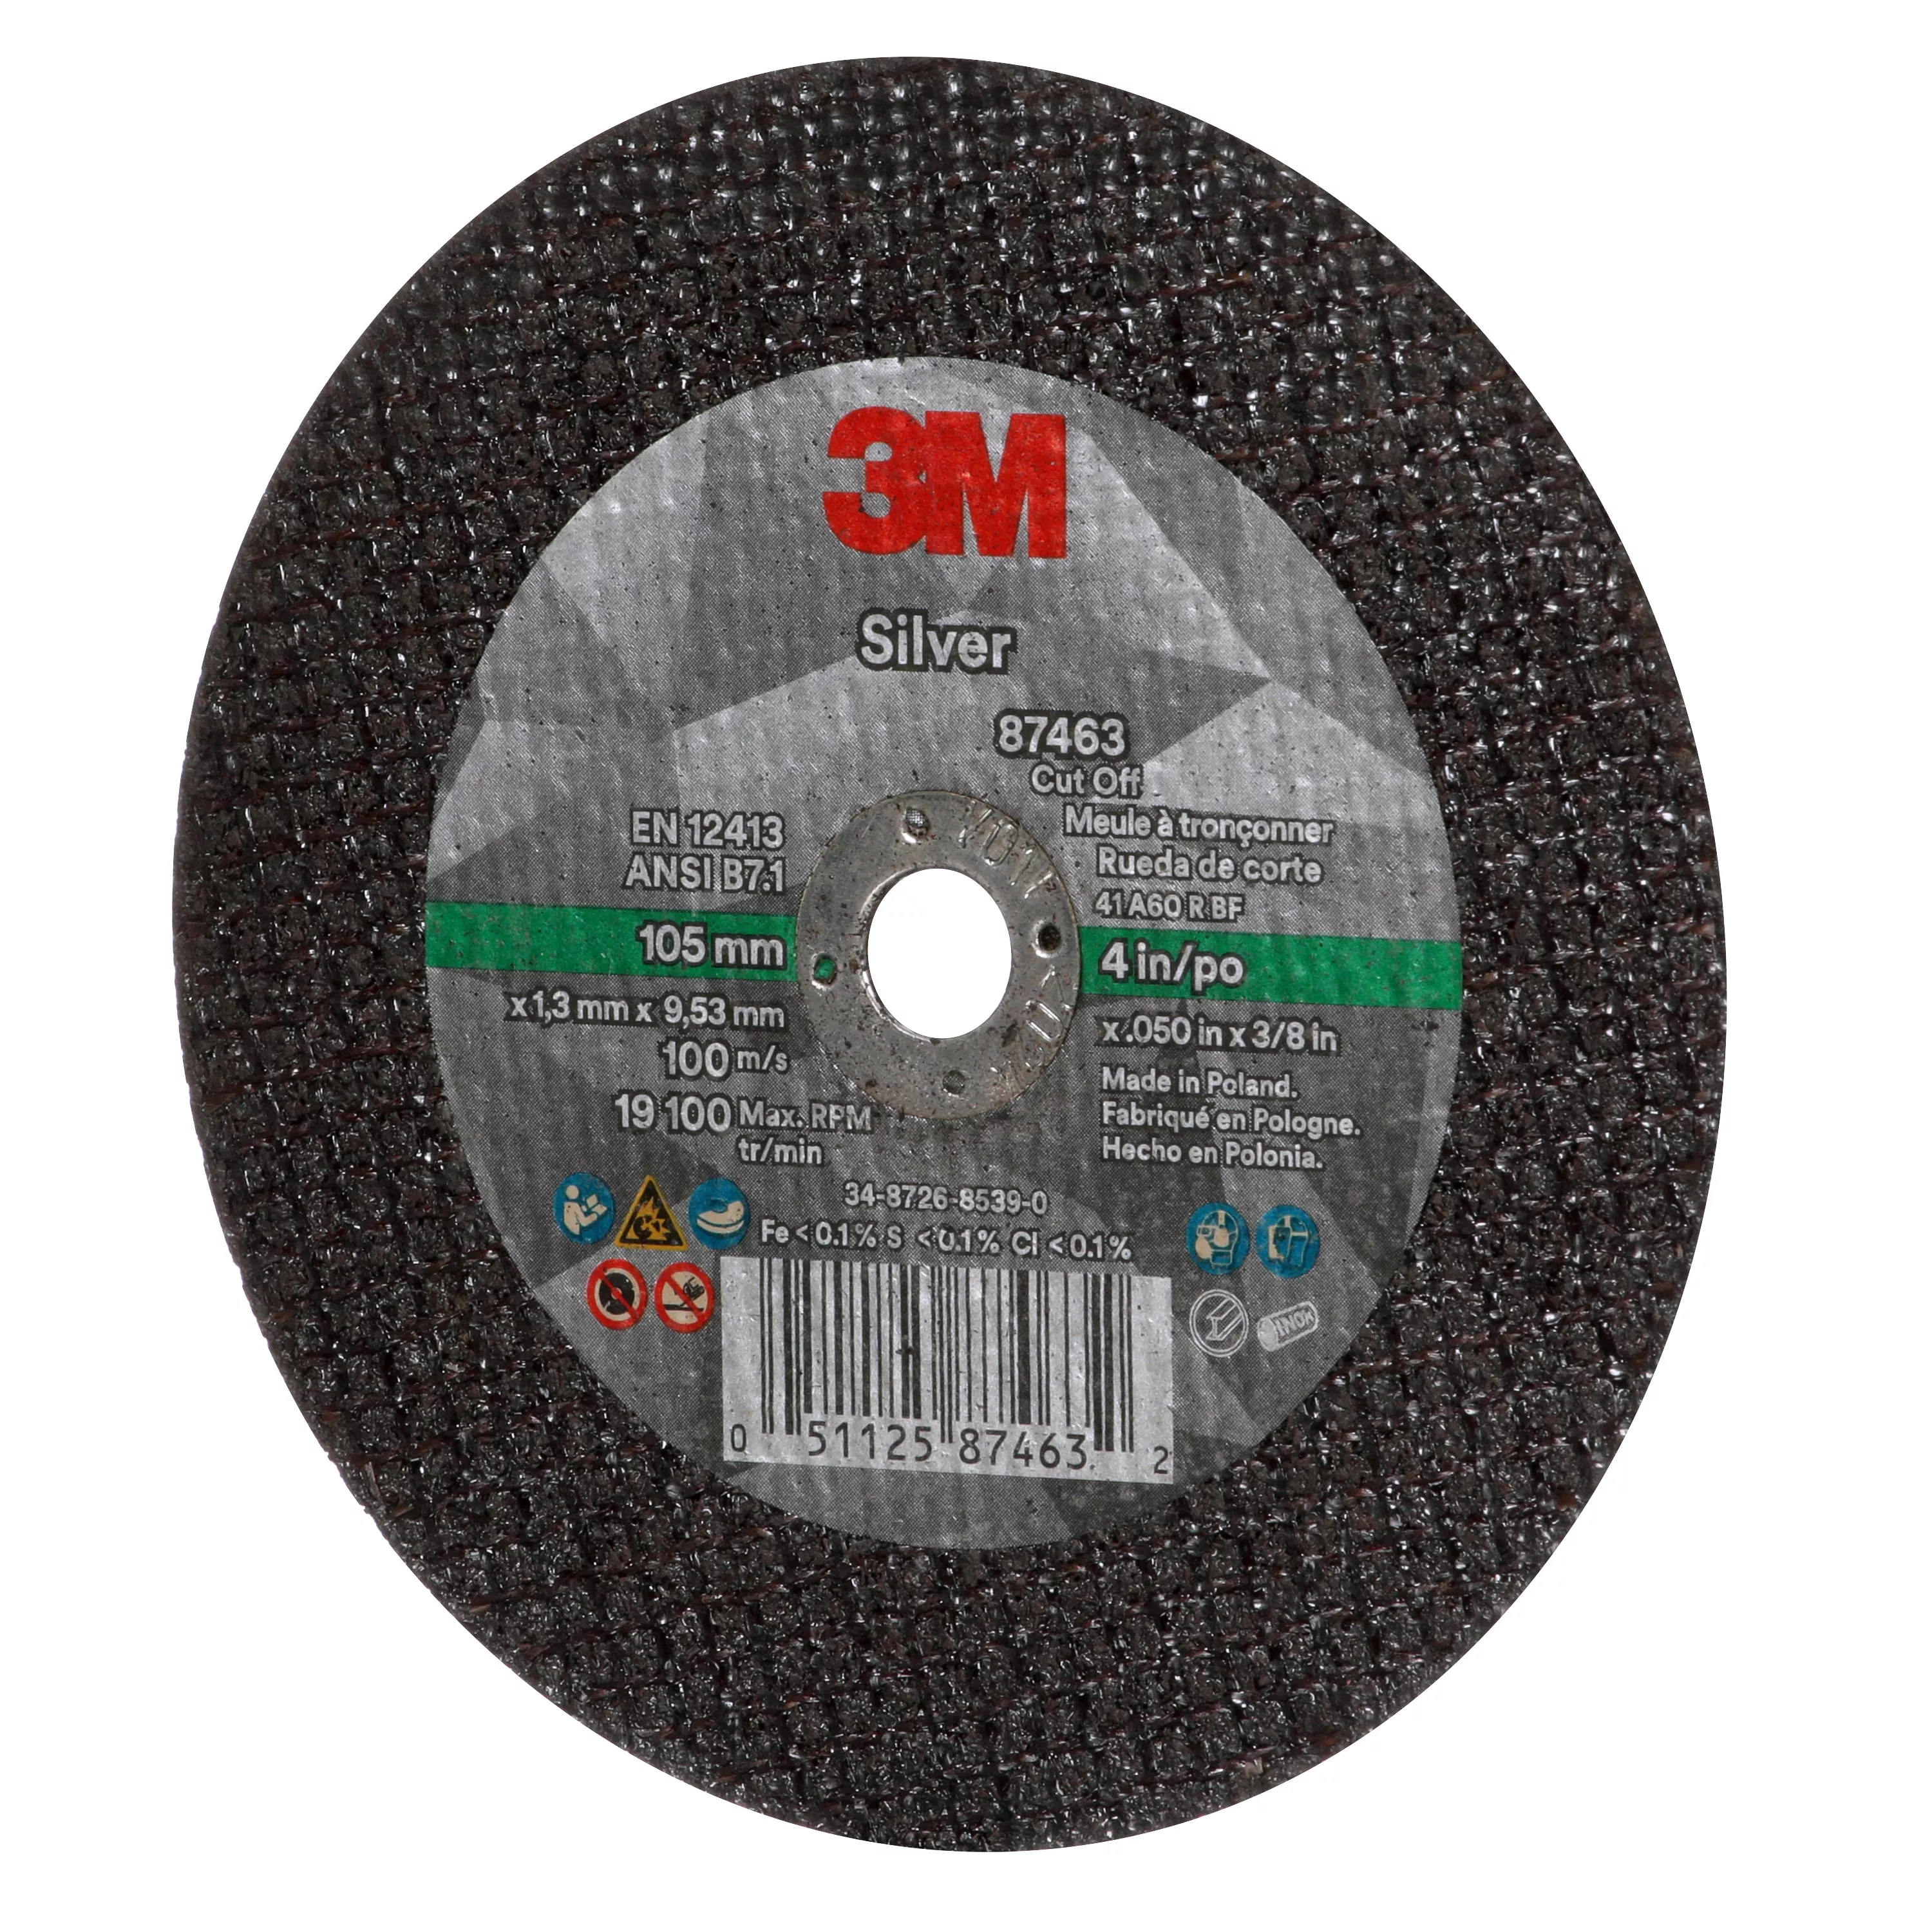 Product Number 87463 | 3M™ Silver Cut-Off Wheel